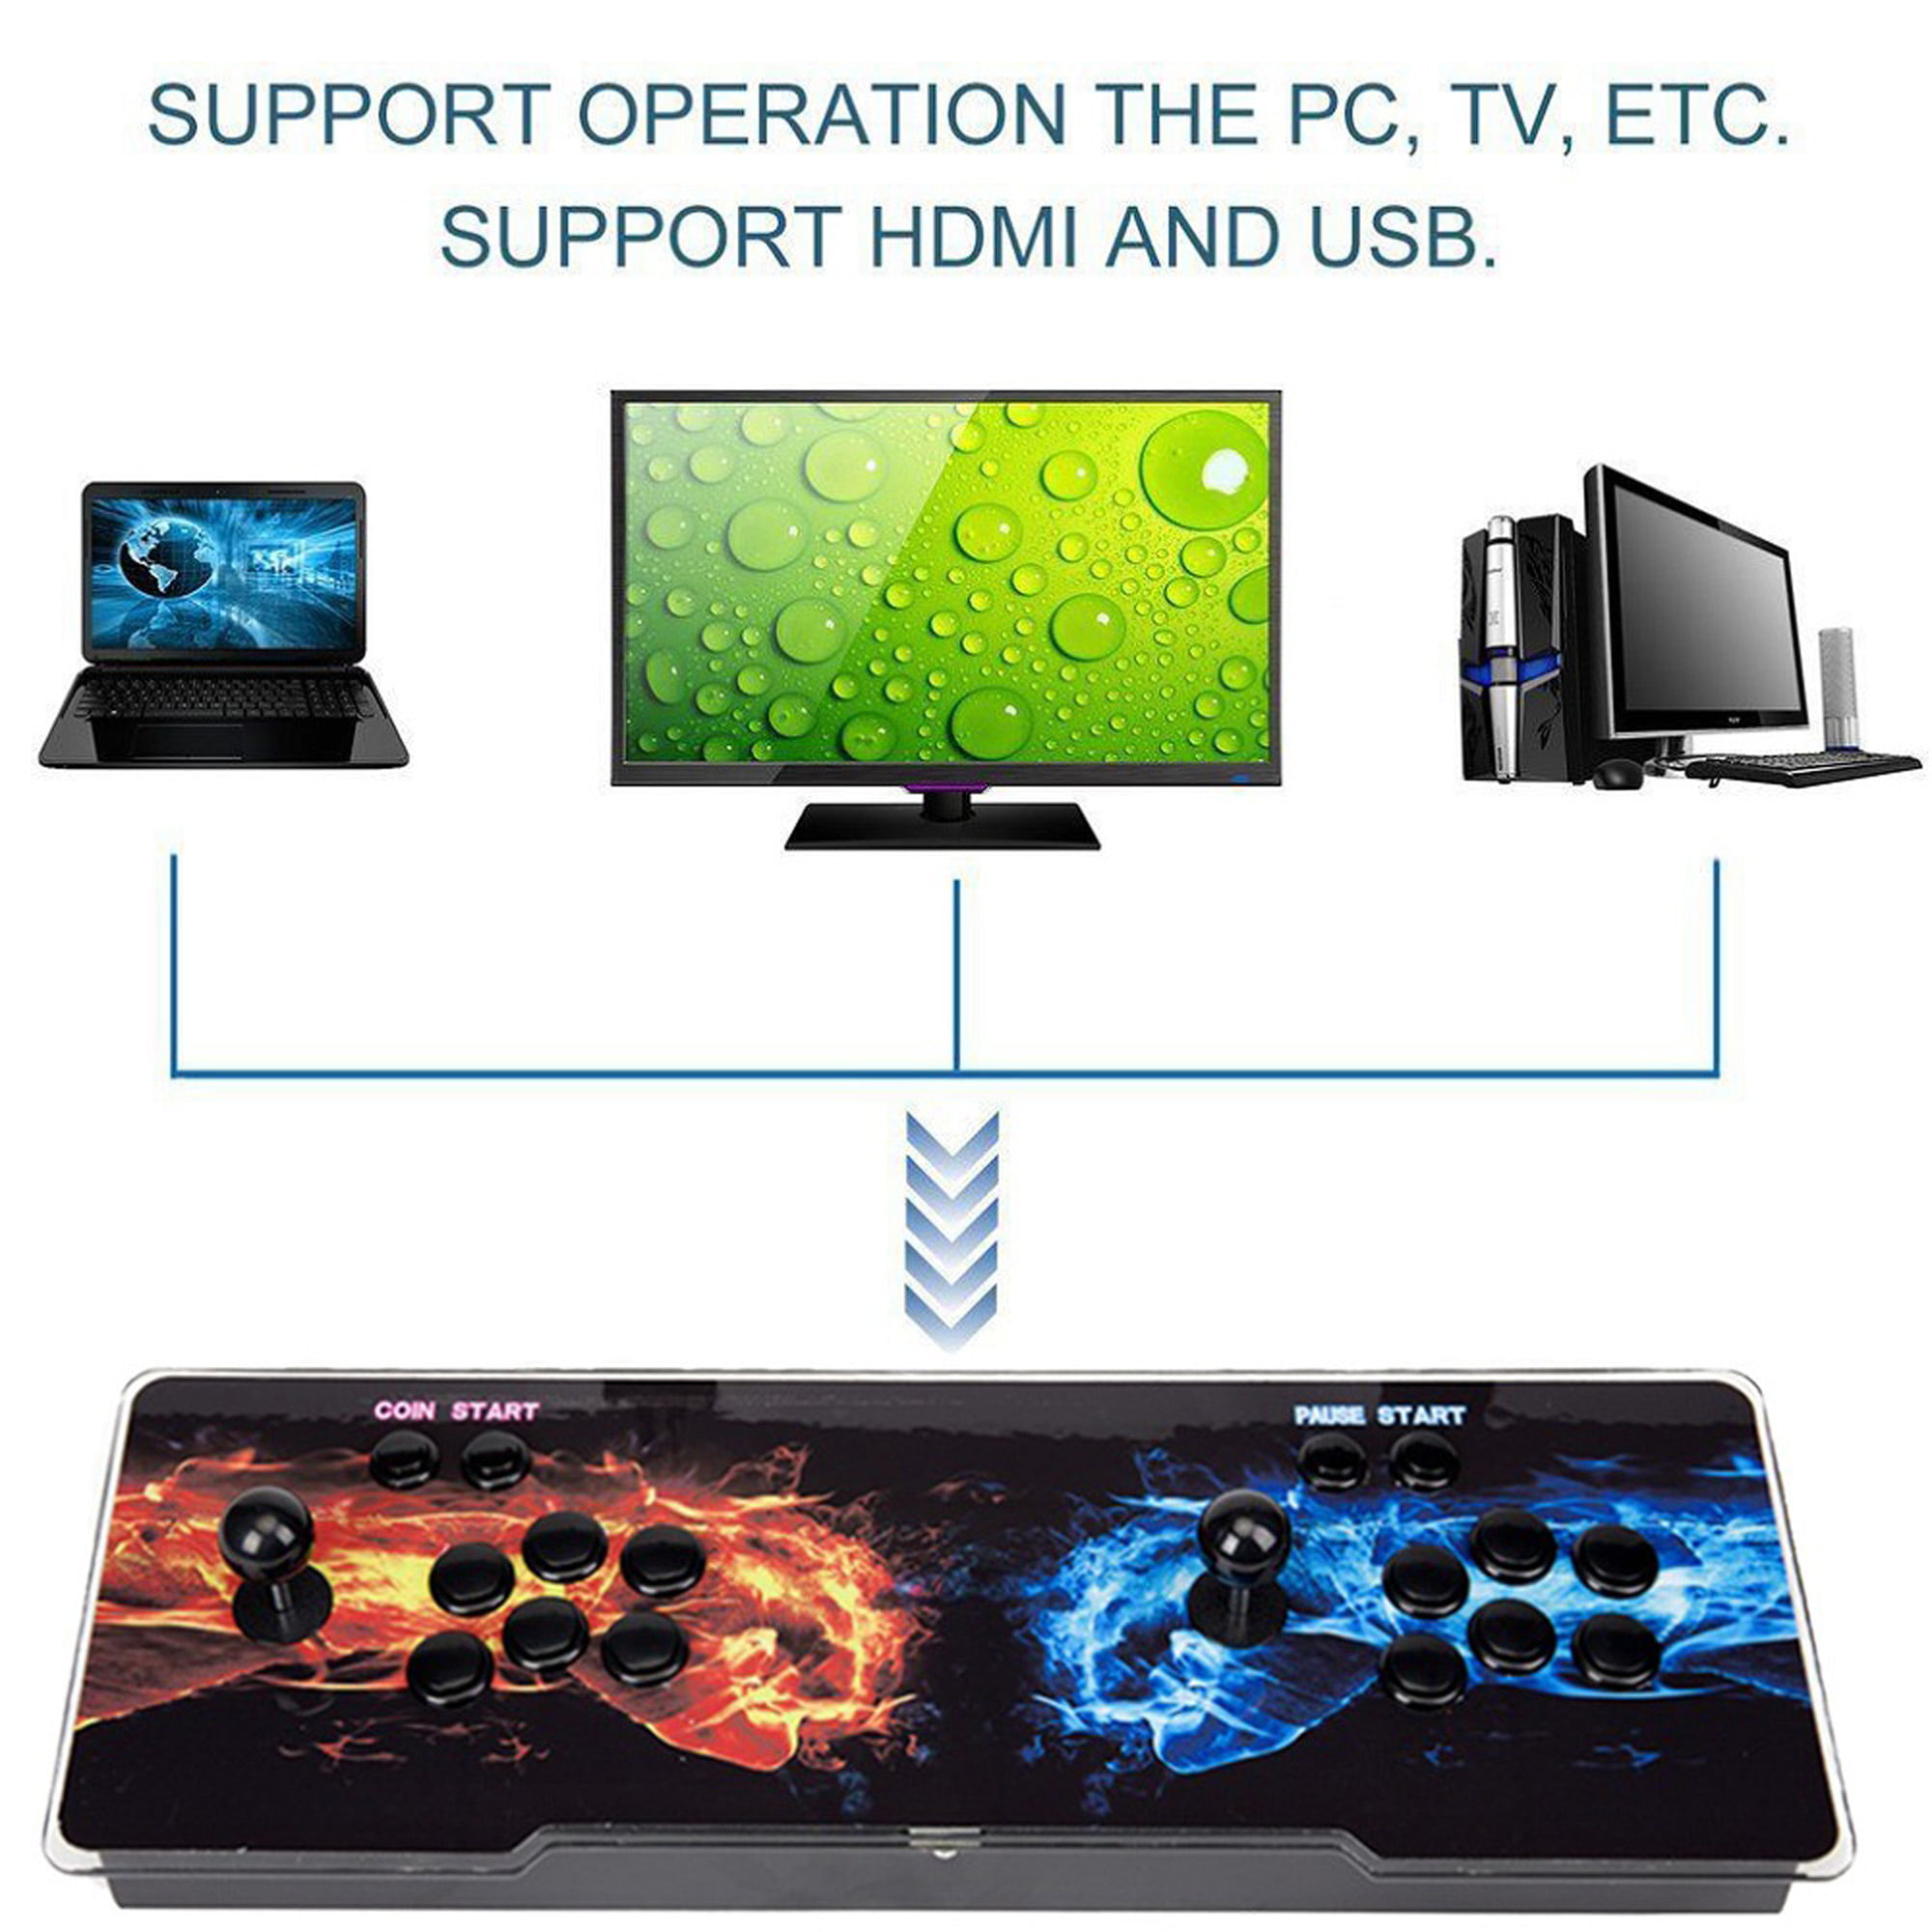 TOJASDN 10000 Games in 1 Arcade Game Console ，Pandora Box 3D Double  Stick，WiFi Function to Add More Games，Retro Game Machine for PC & Projector  